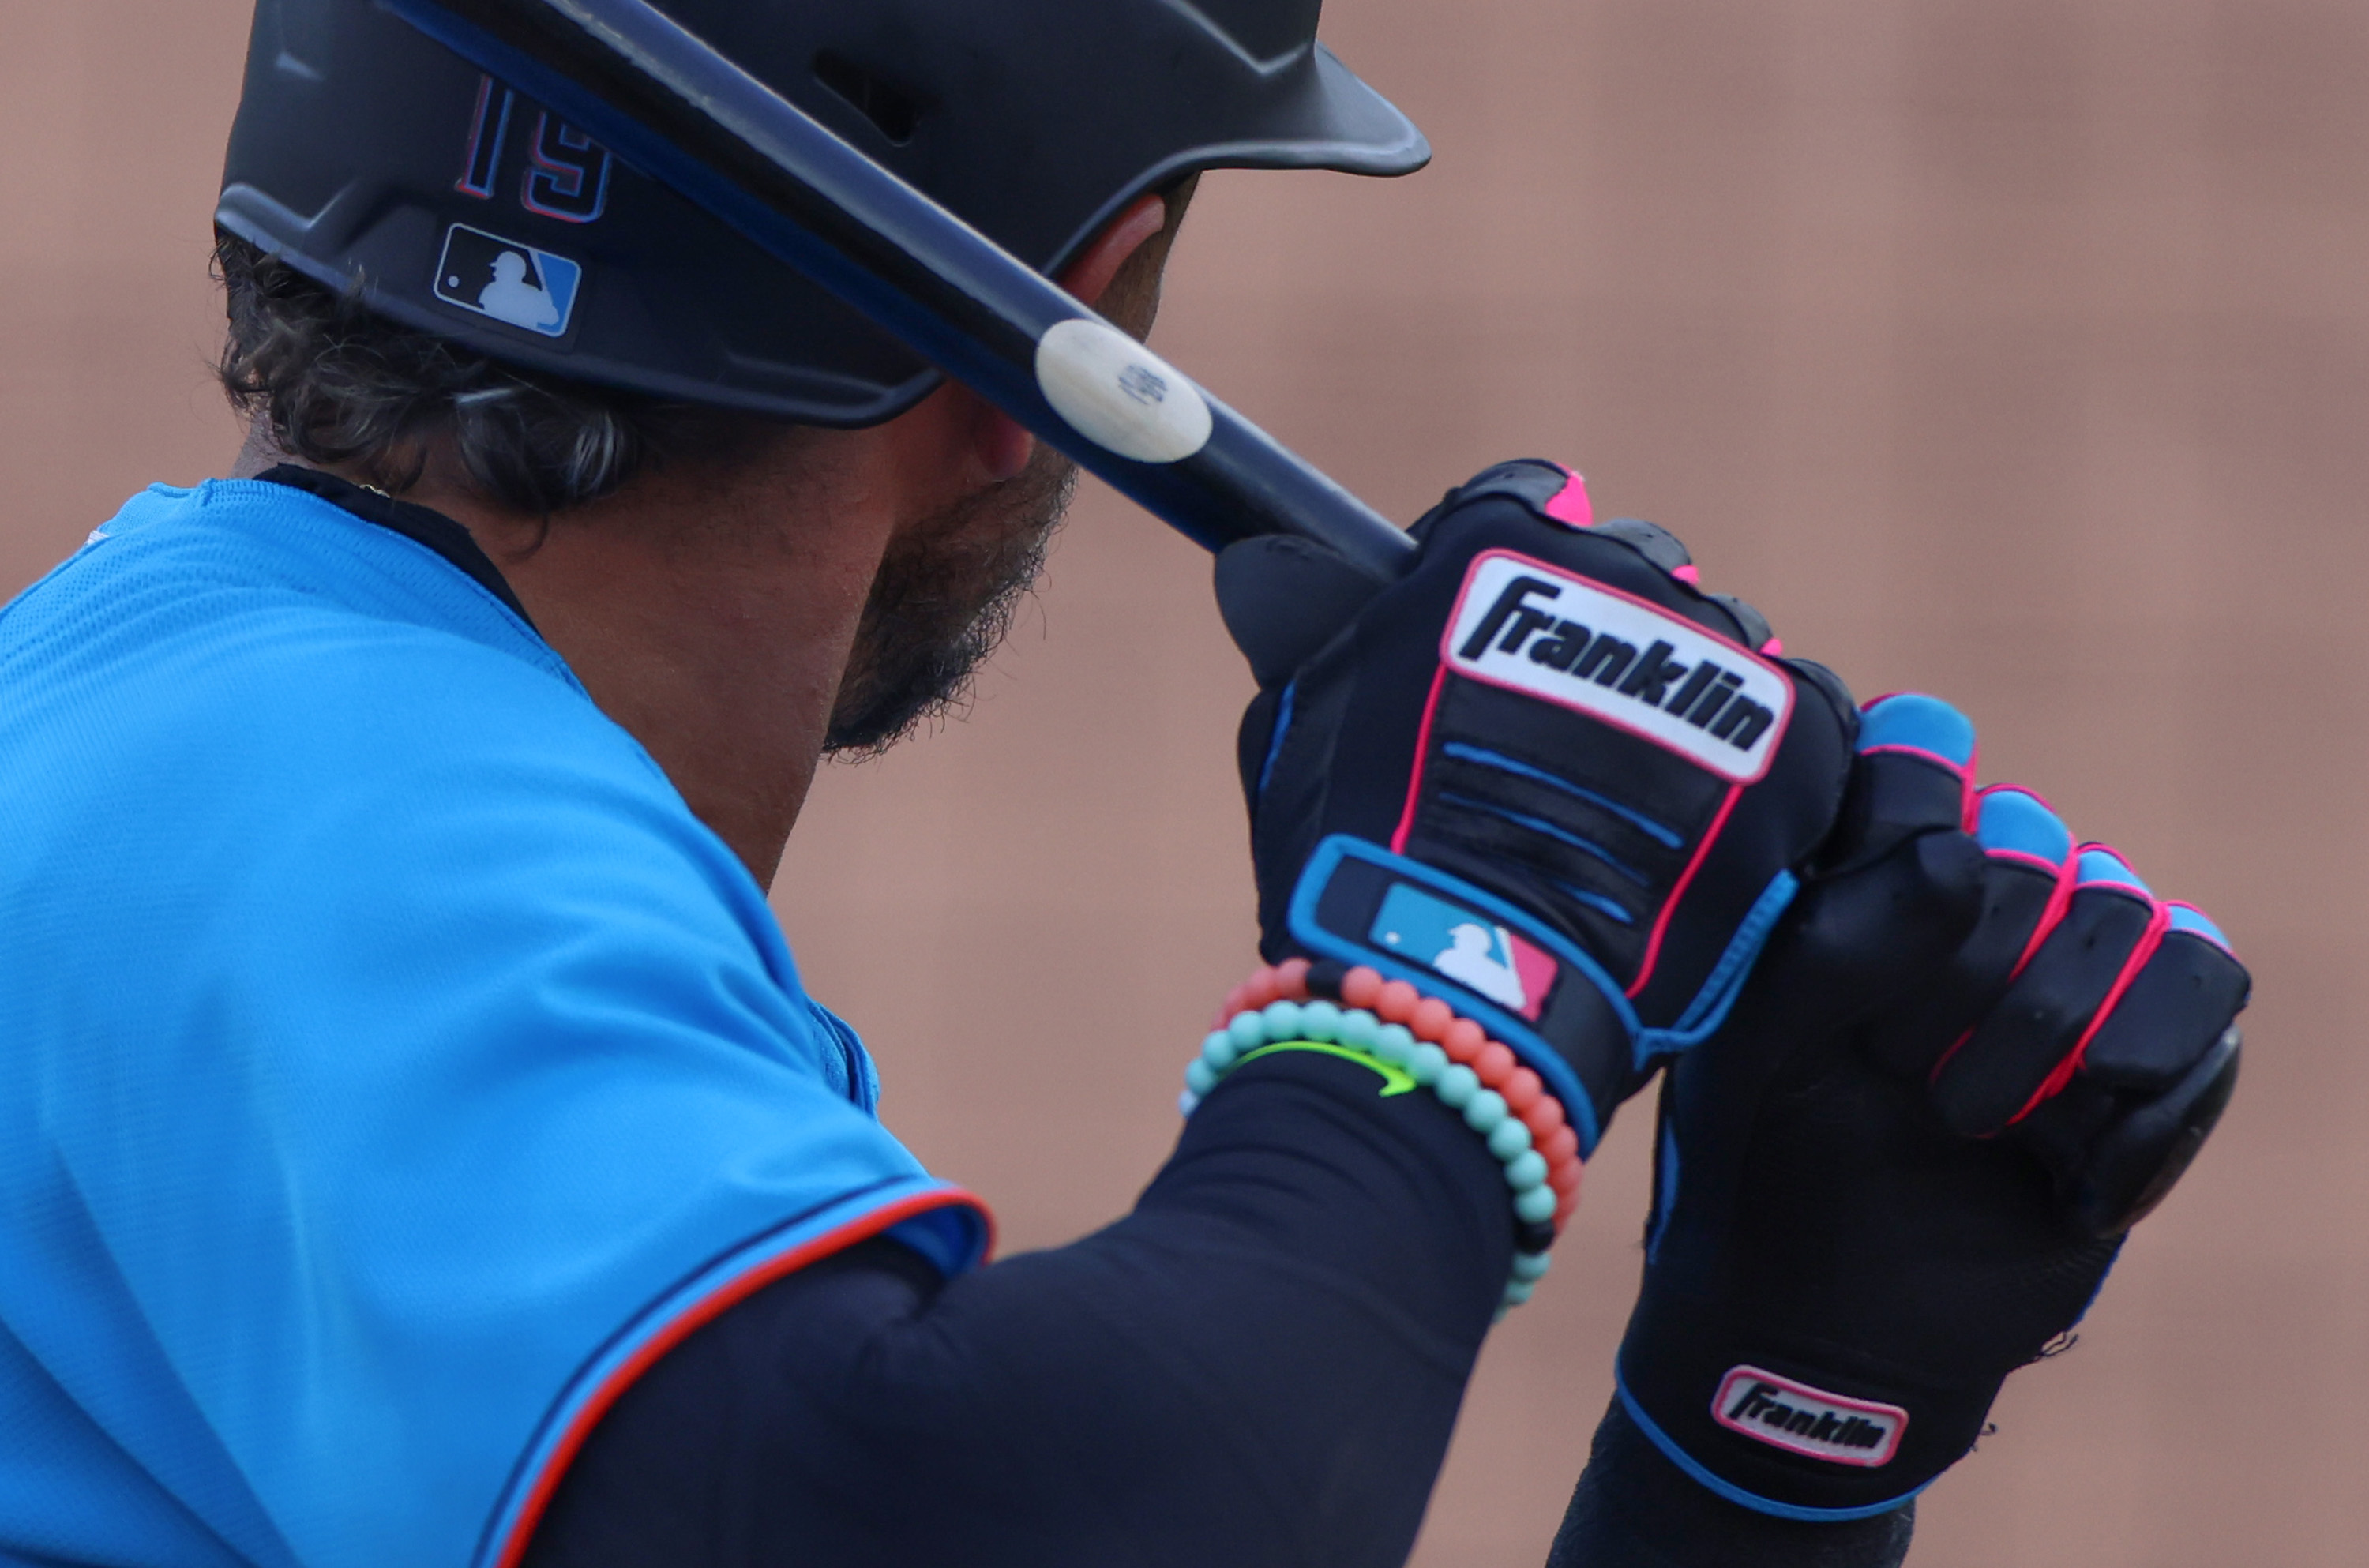 A detailed view of the Franklin batting gloves worn by Miguel Rojas #19 of the Miami Marlins against the St. Louis Cardinals in a spring training game at Roger Dean Chevrolet Stadium